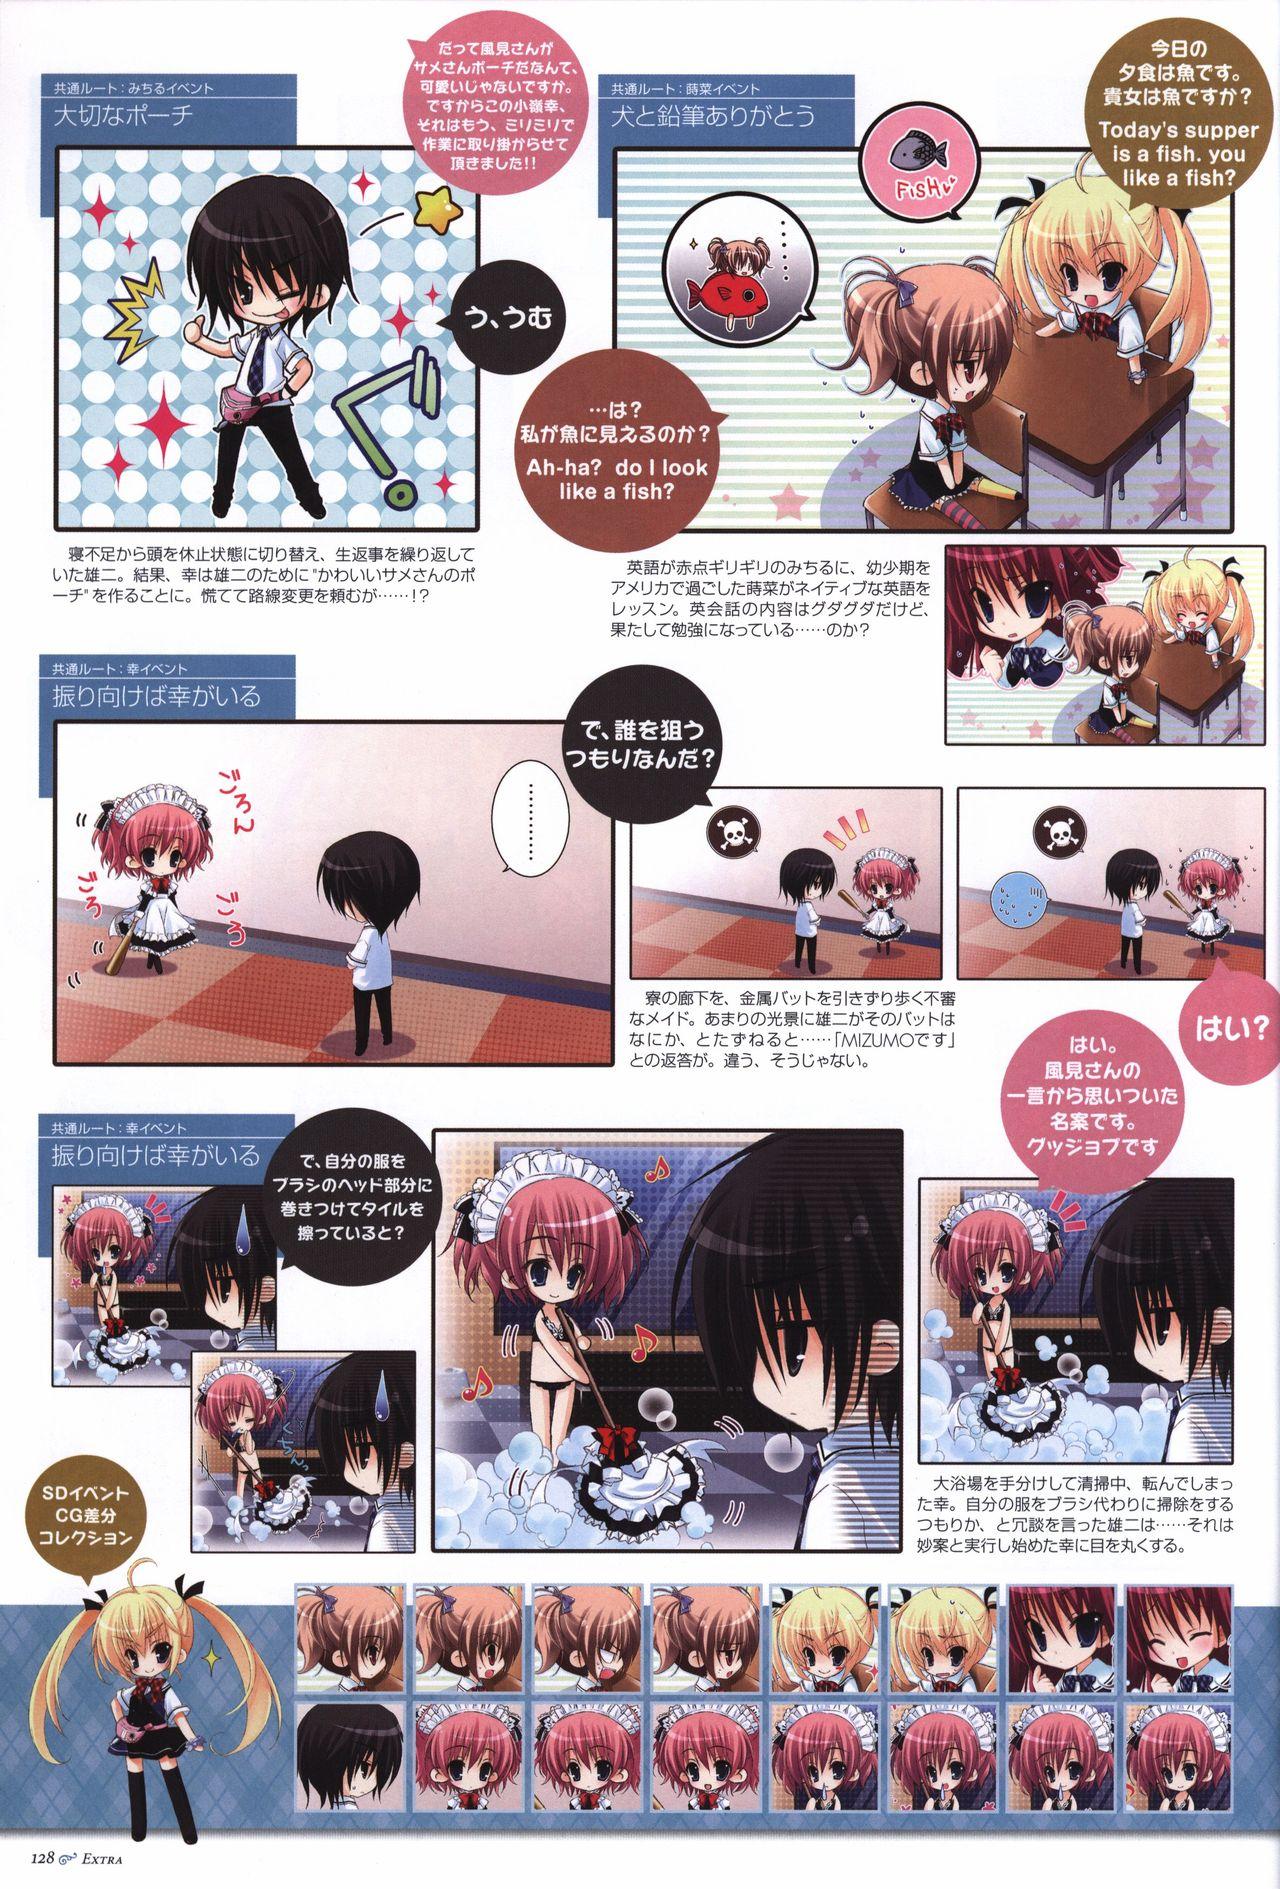 The Fruit of Grisaia Visual FanBook 128